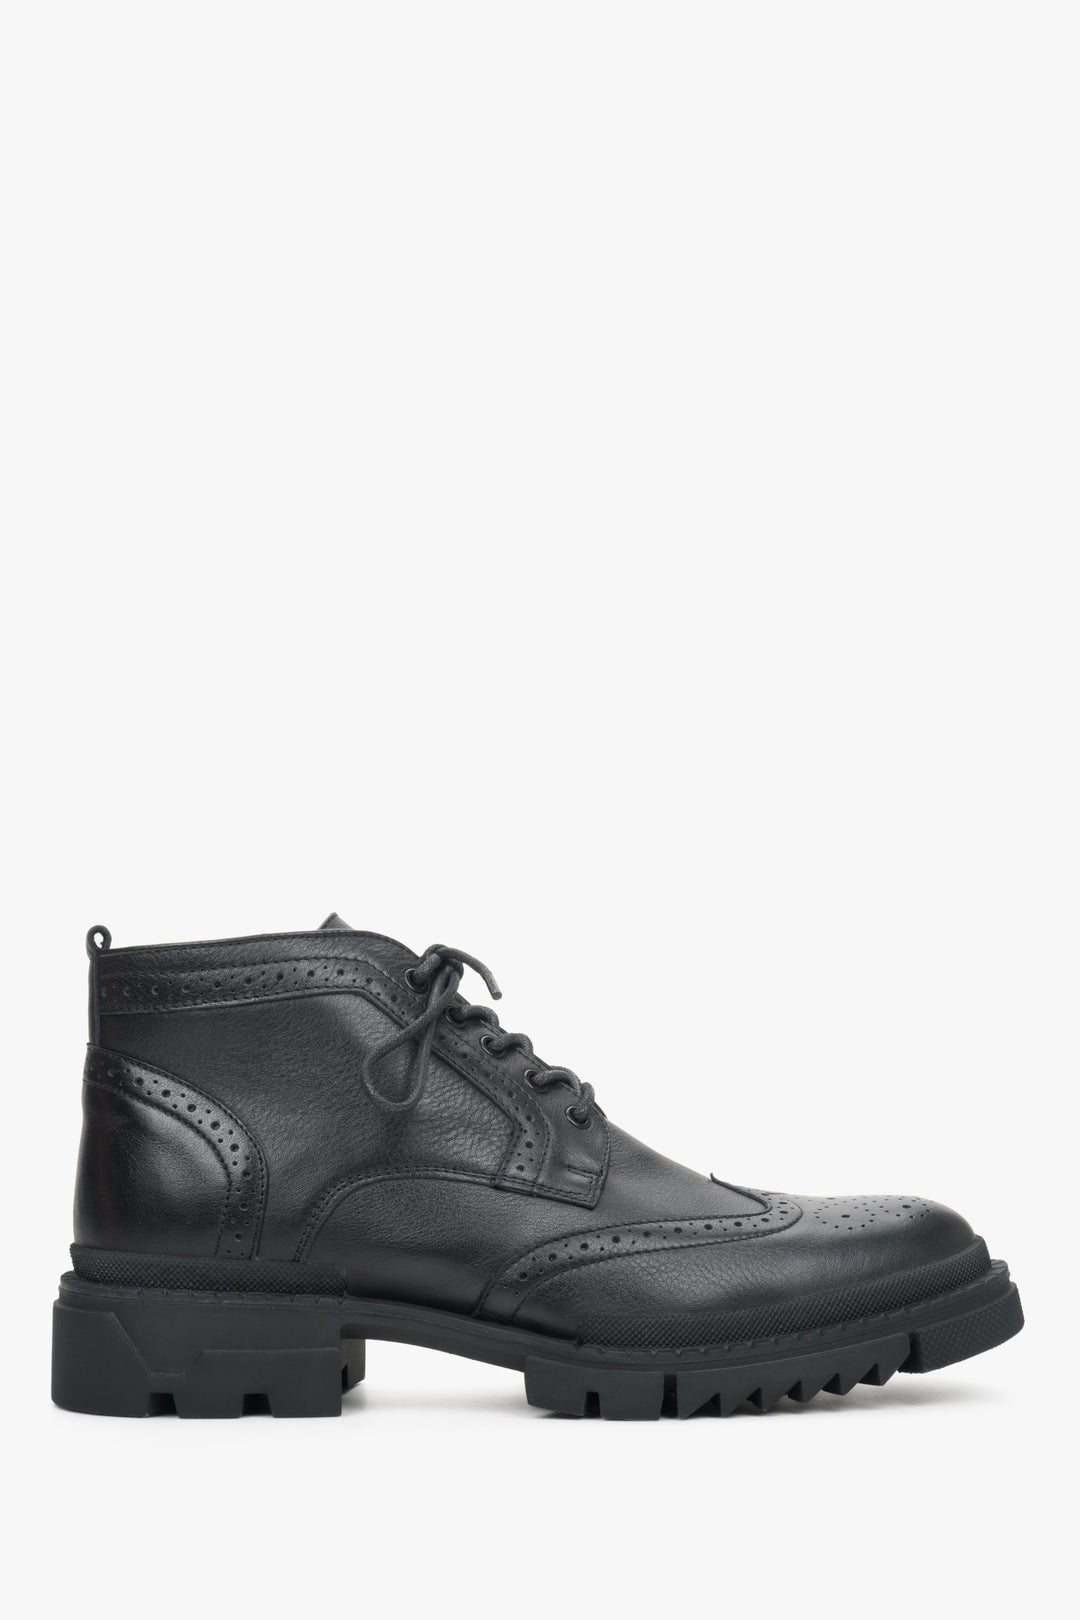 Tall, black men's winter boots made from genuine leather with laces, from the Estro brand - shoe profile.